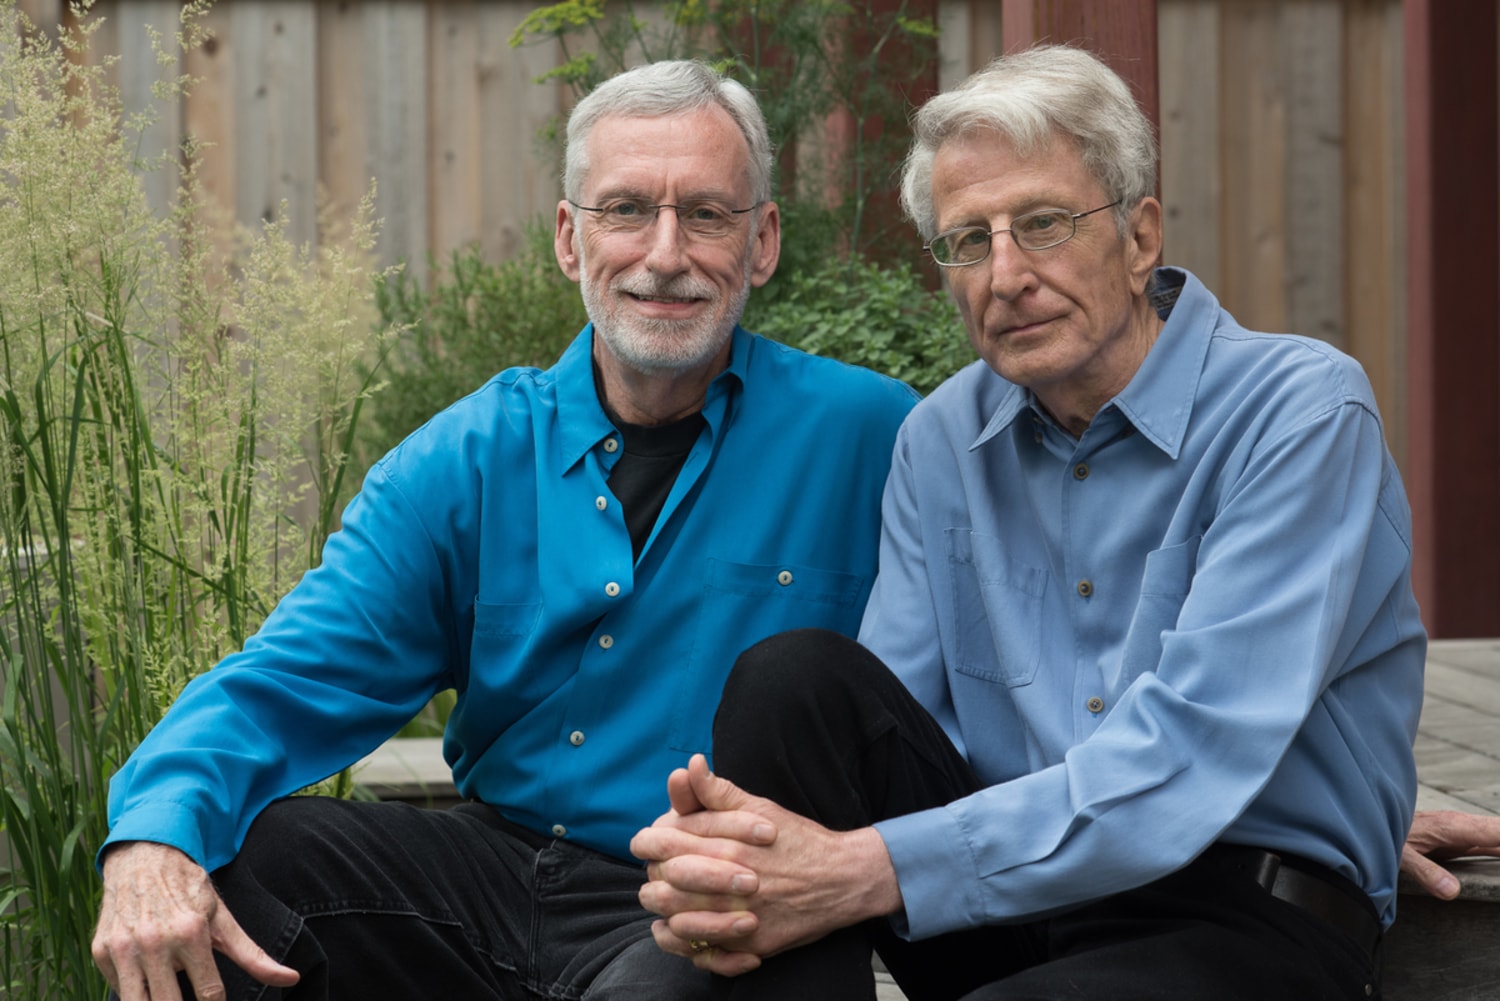 After decades-long legal battle, gay couples 1971 marriage officially recognized